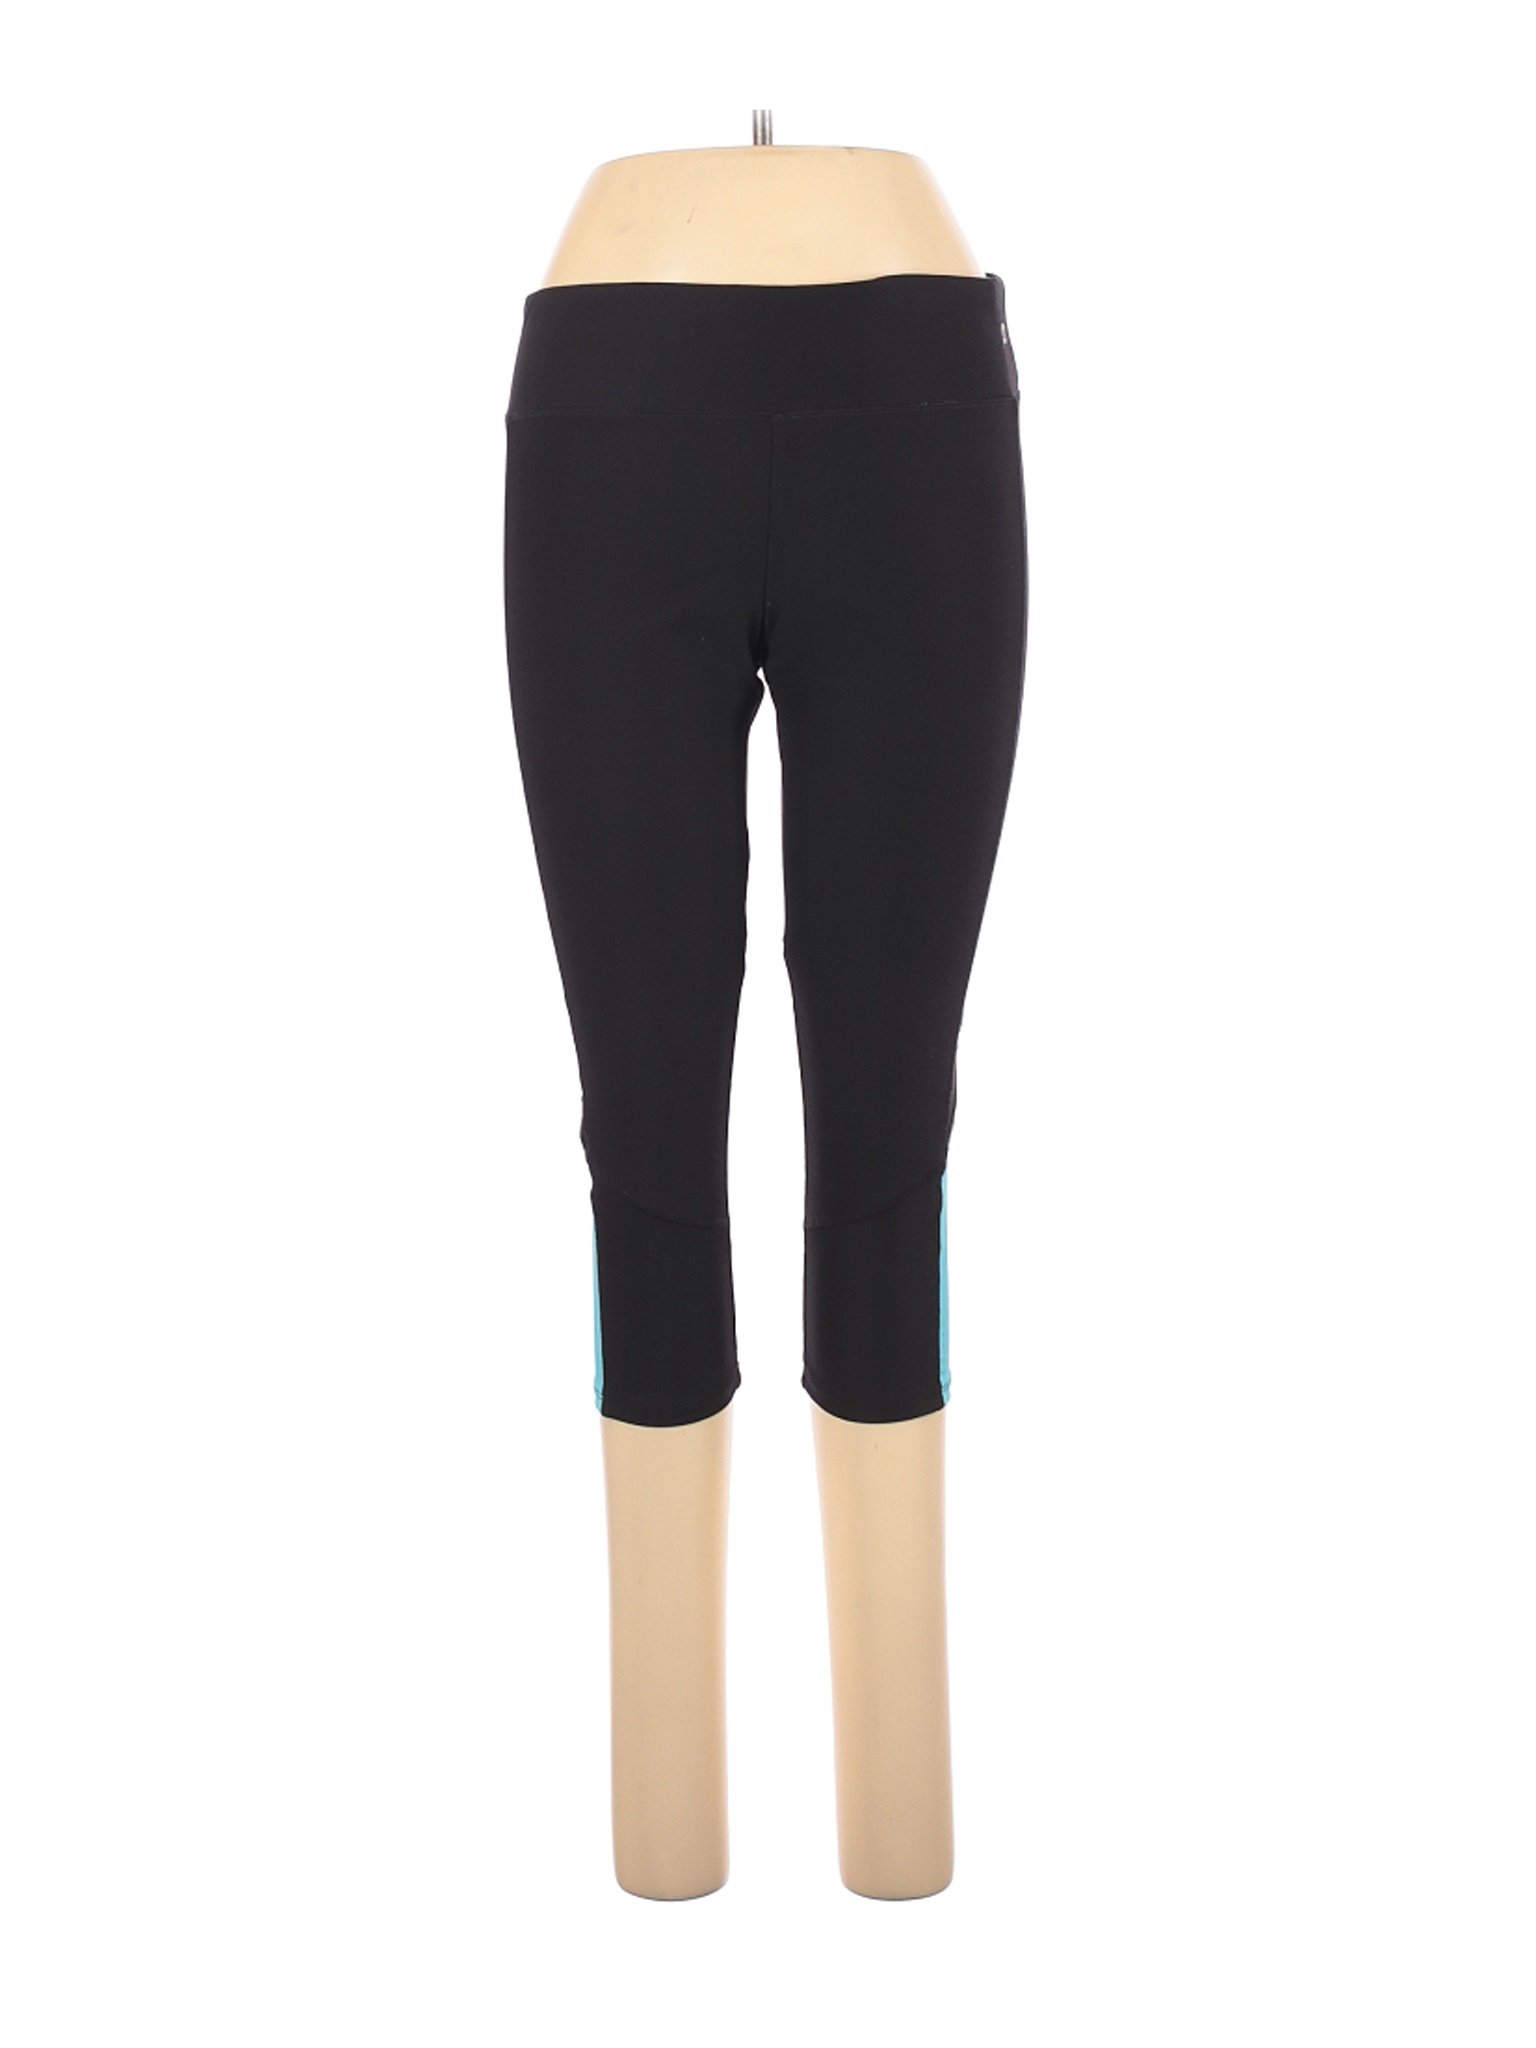 Energy Zone Solid Black Active Pants Size L - 50% off | thredUP